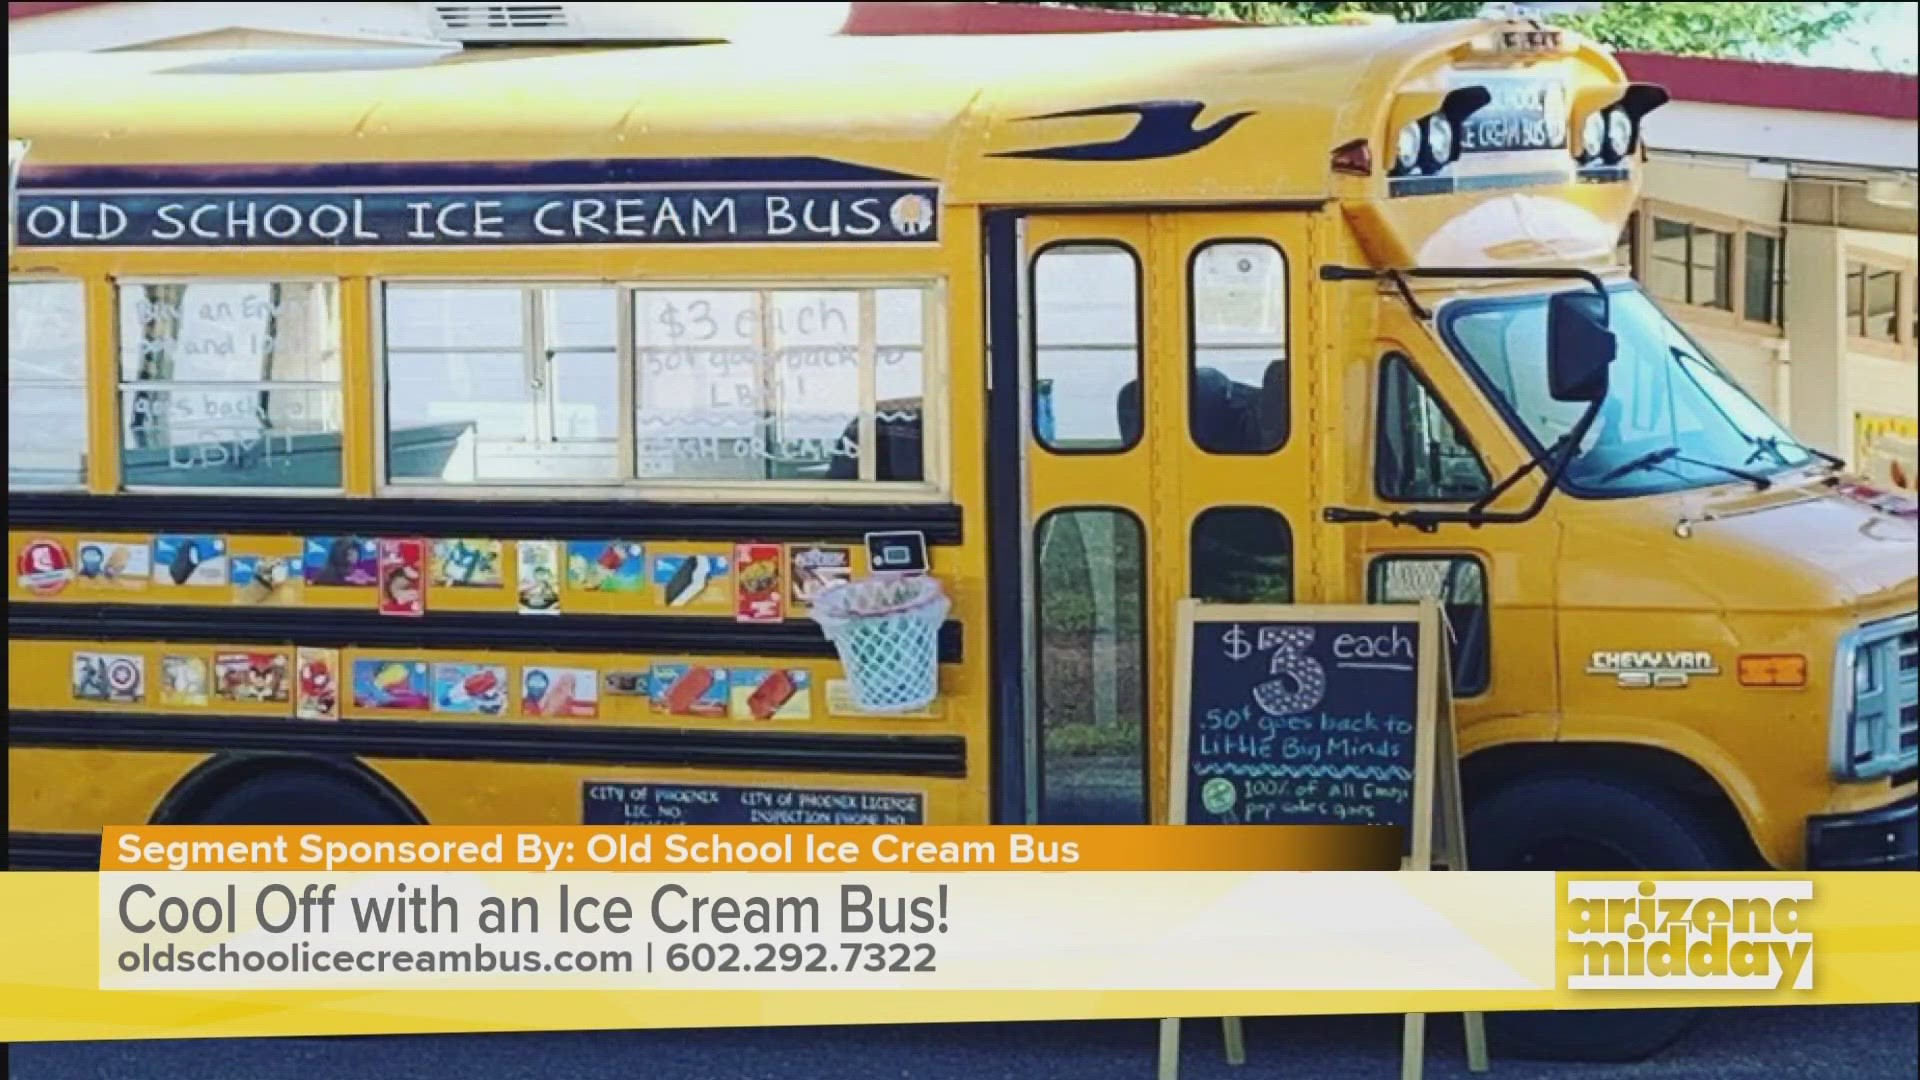 Amanda Corey, owner of the Old School Ice Cream Bus, tells us about her family legacy in the ice cream business and how she supports schools in the Valley.